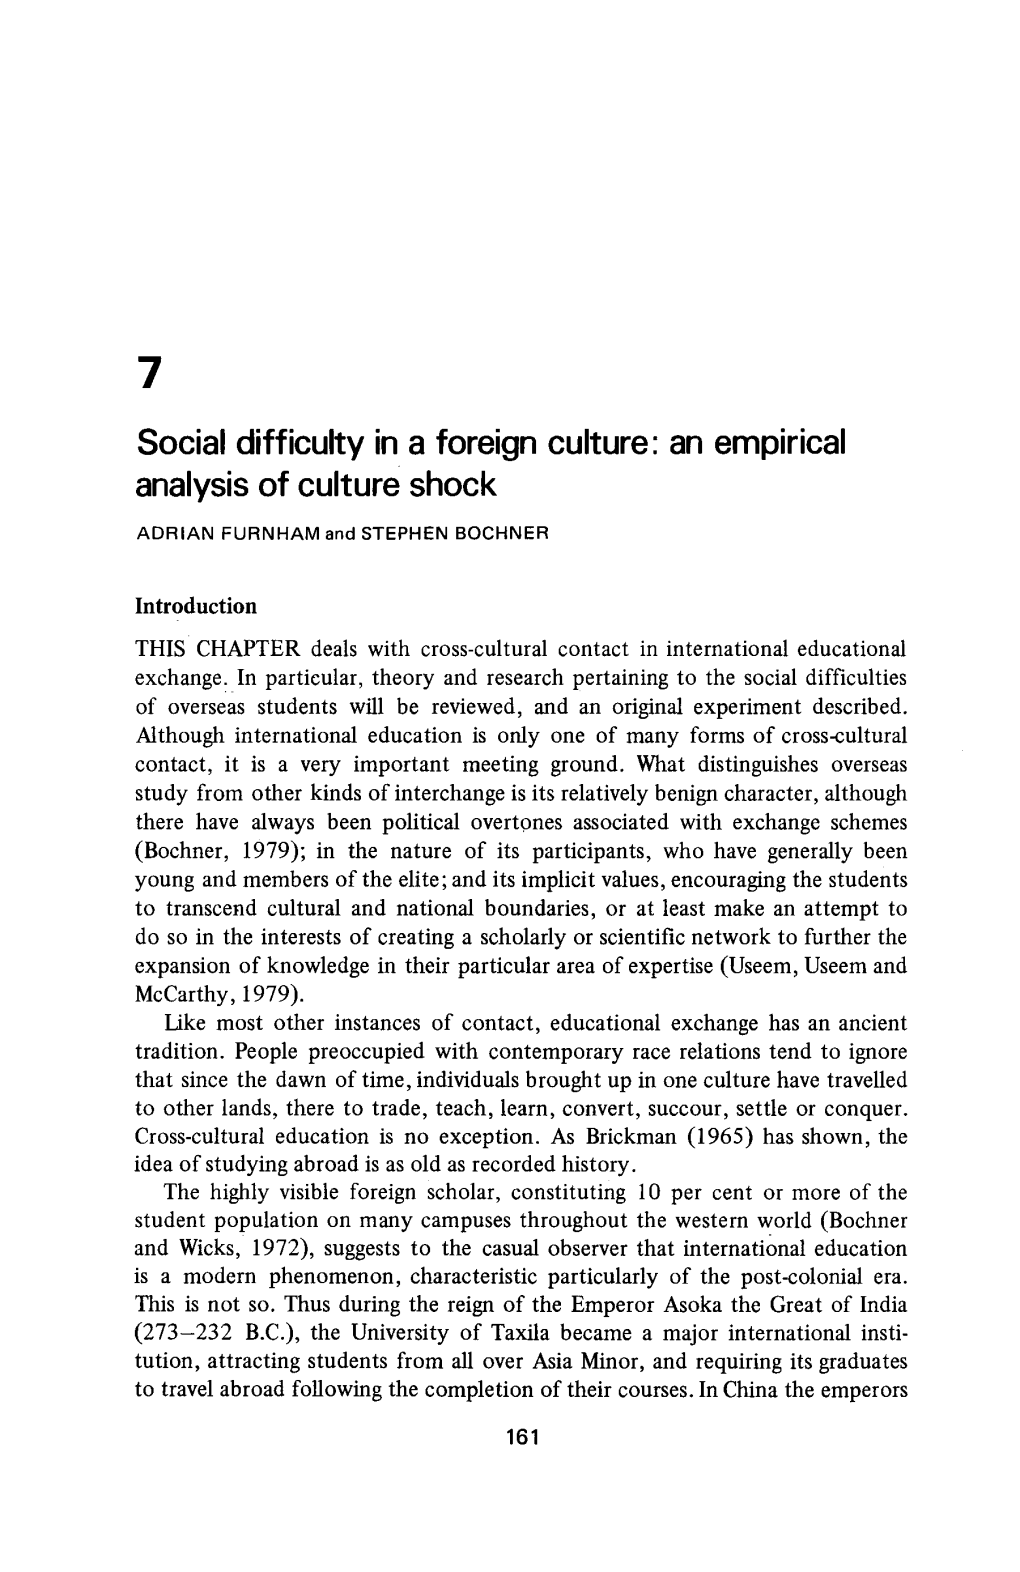 Social Difficulty in a Foreign Culture: an Empirical Analysis of Culture Shock